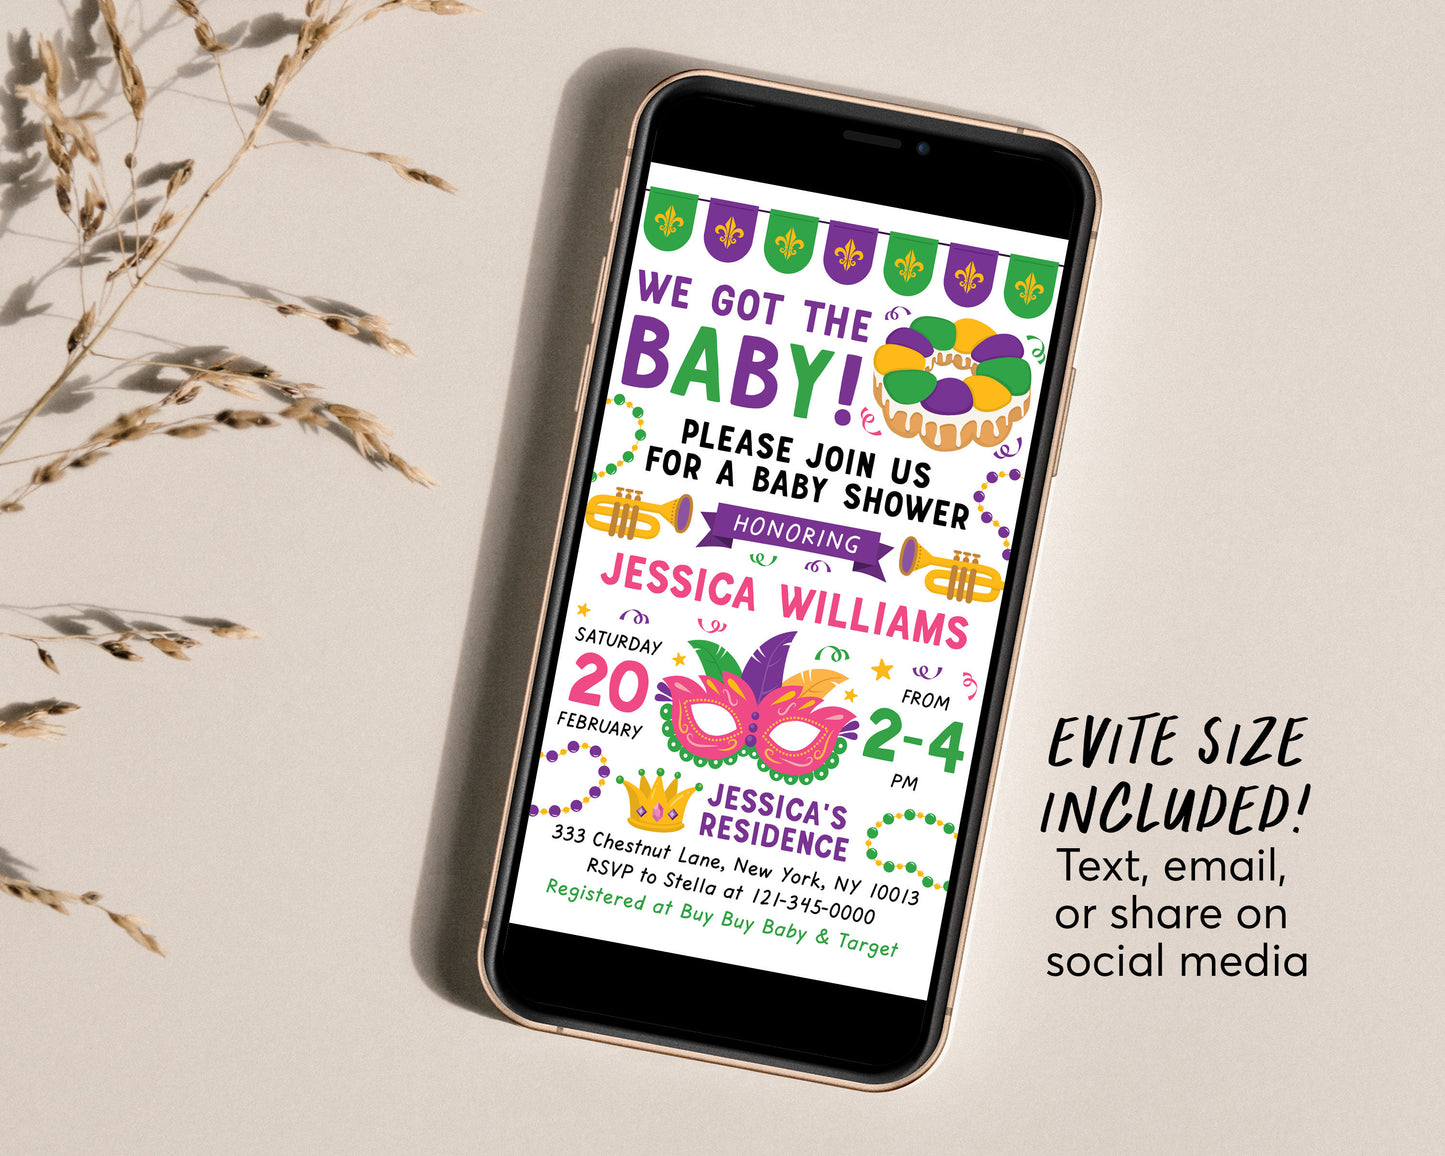 Mardi Gras Baby Shower Invitation Editable Template, We got the Baby, King Cake New Orleans Fat Tuesday Invite Printable, New to the Krewe